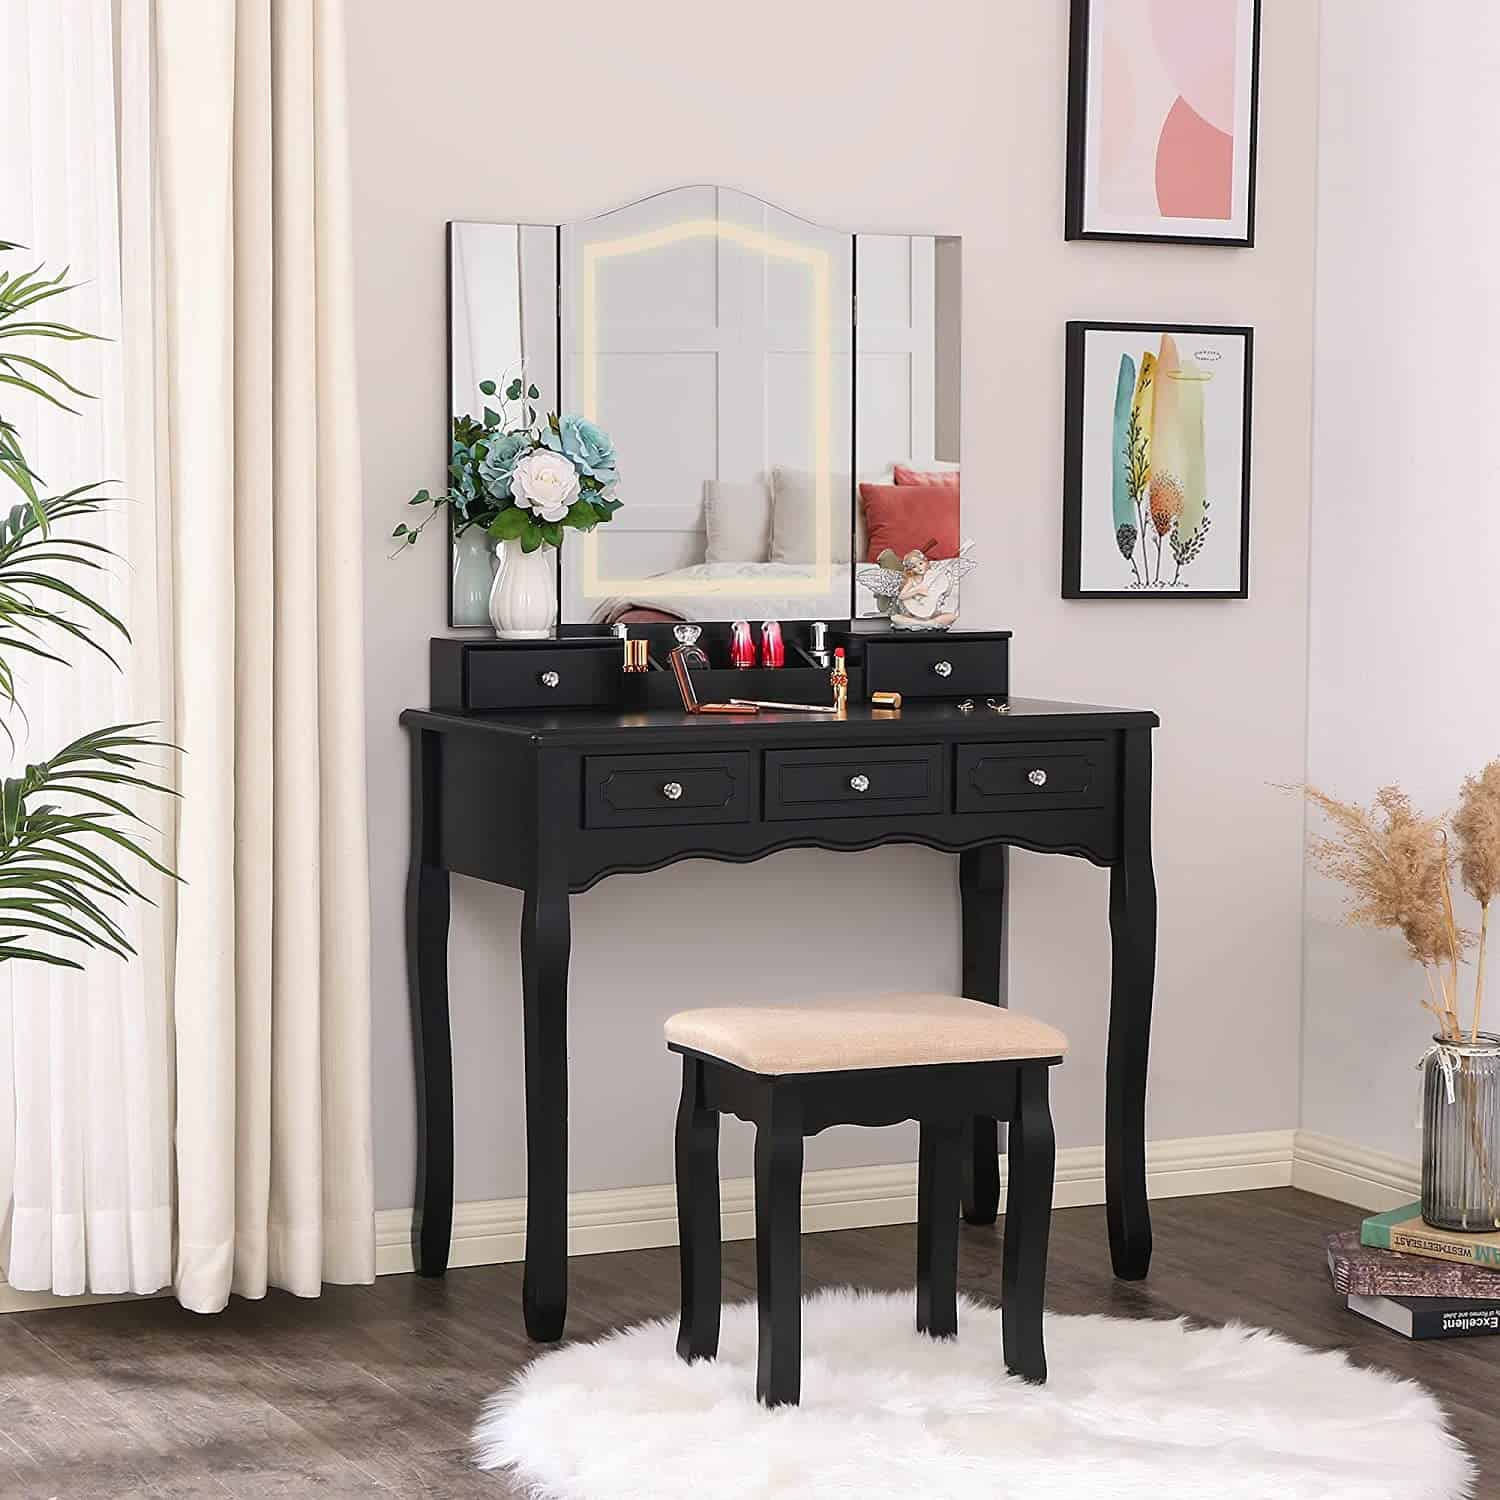 An attractive black-colored dressing table design with a 3-fold mirror, minimum storage space, and a matching stool, in a white room.